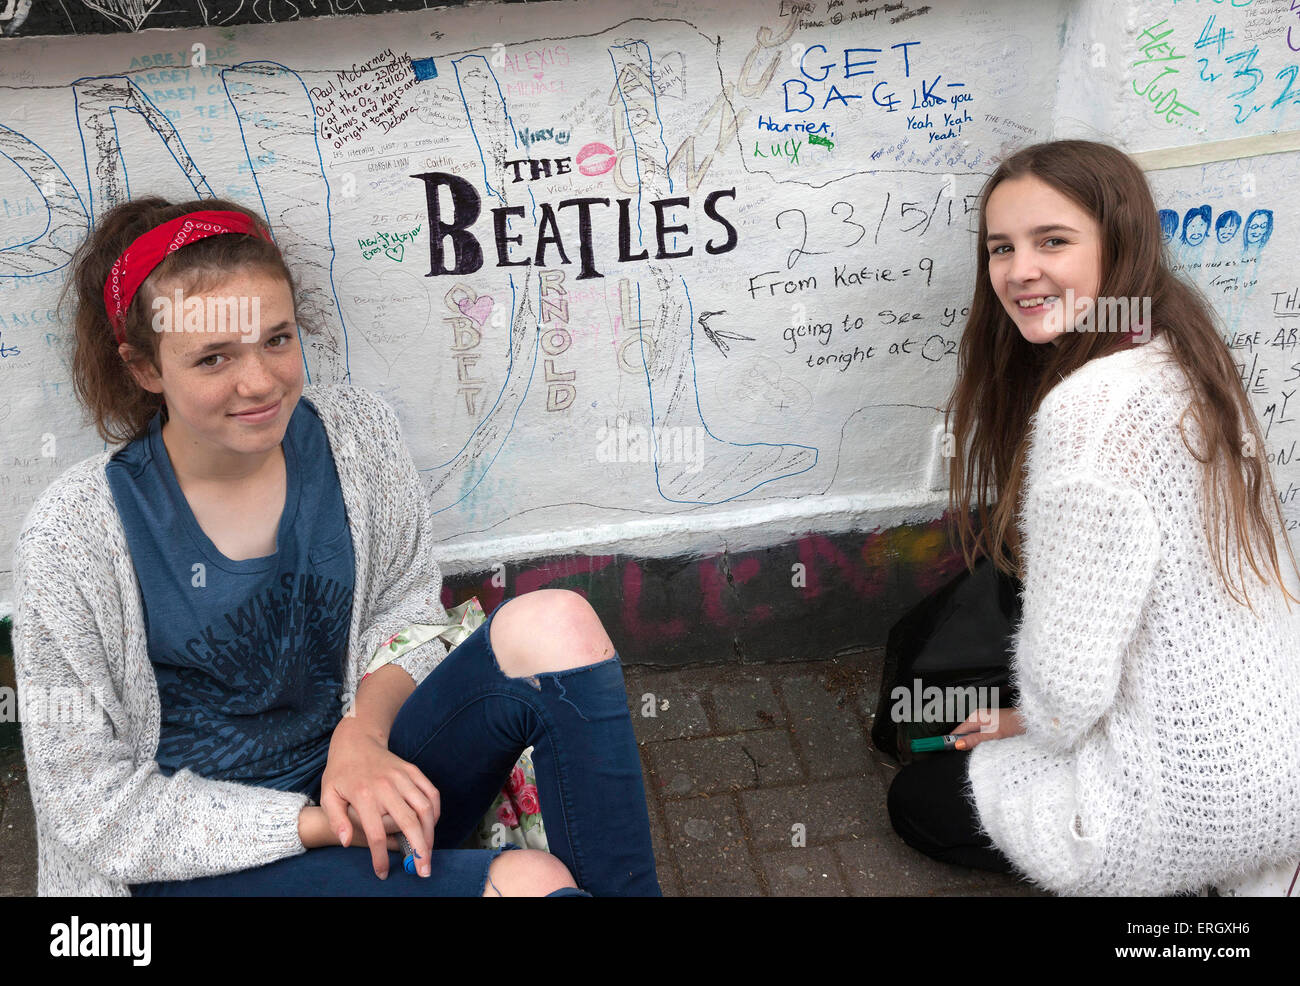 Beatles fans writing on wall at Abbey Road studios Stock Photo